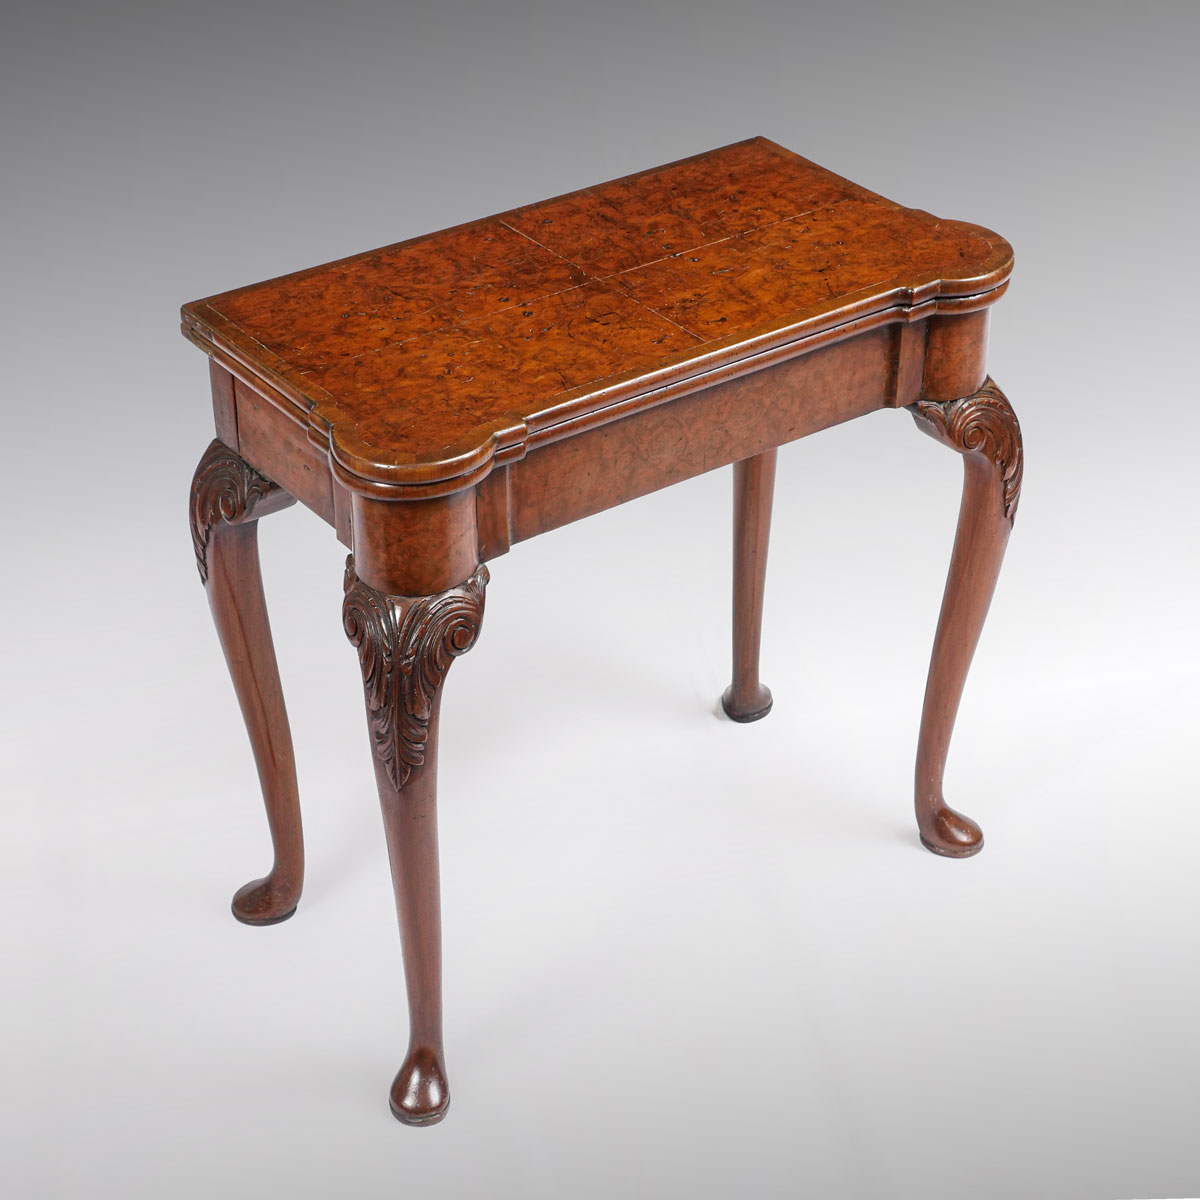 QUEEN ANNE CARD TABLE: Beautiful